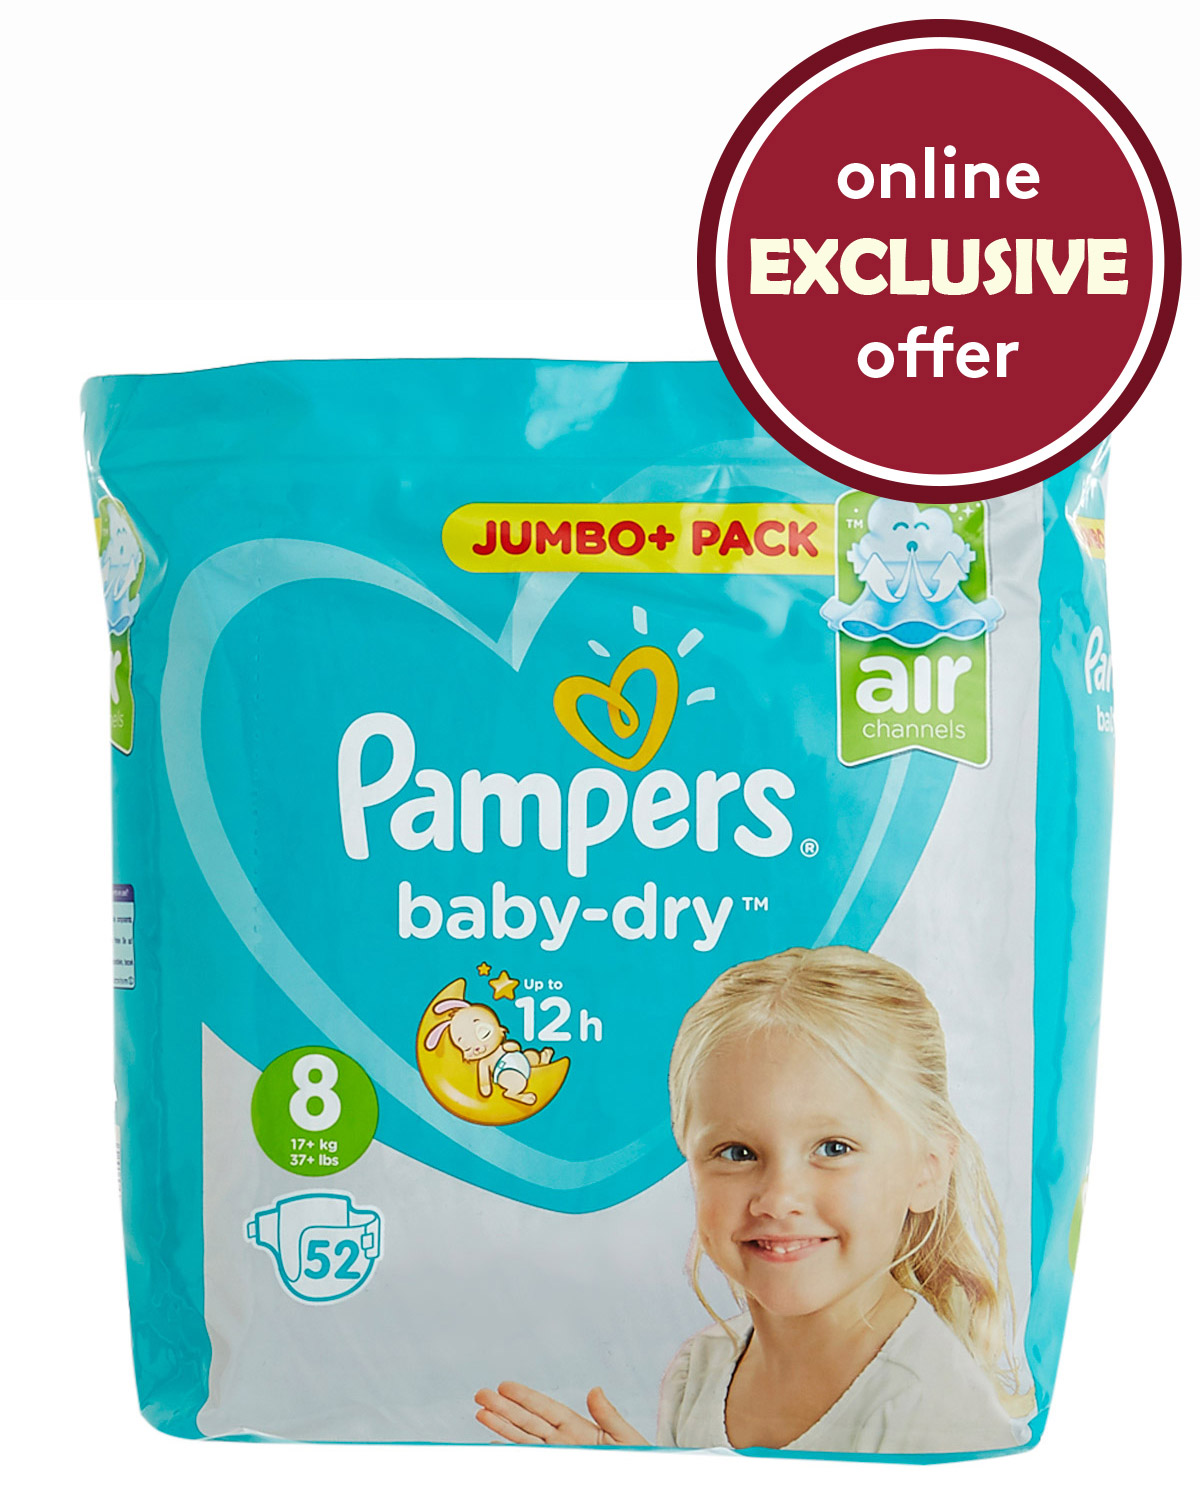 Pampers Baby-Dry Size 8, 52 Nappies, 17+kg, Jumbo+ Pack